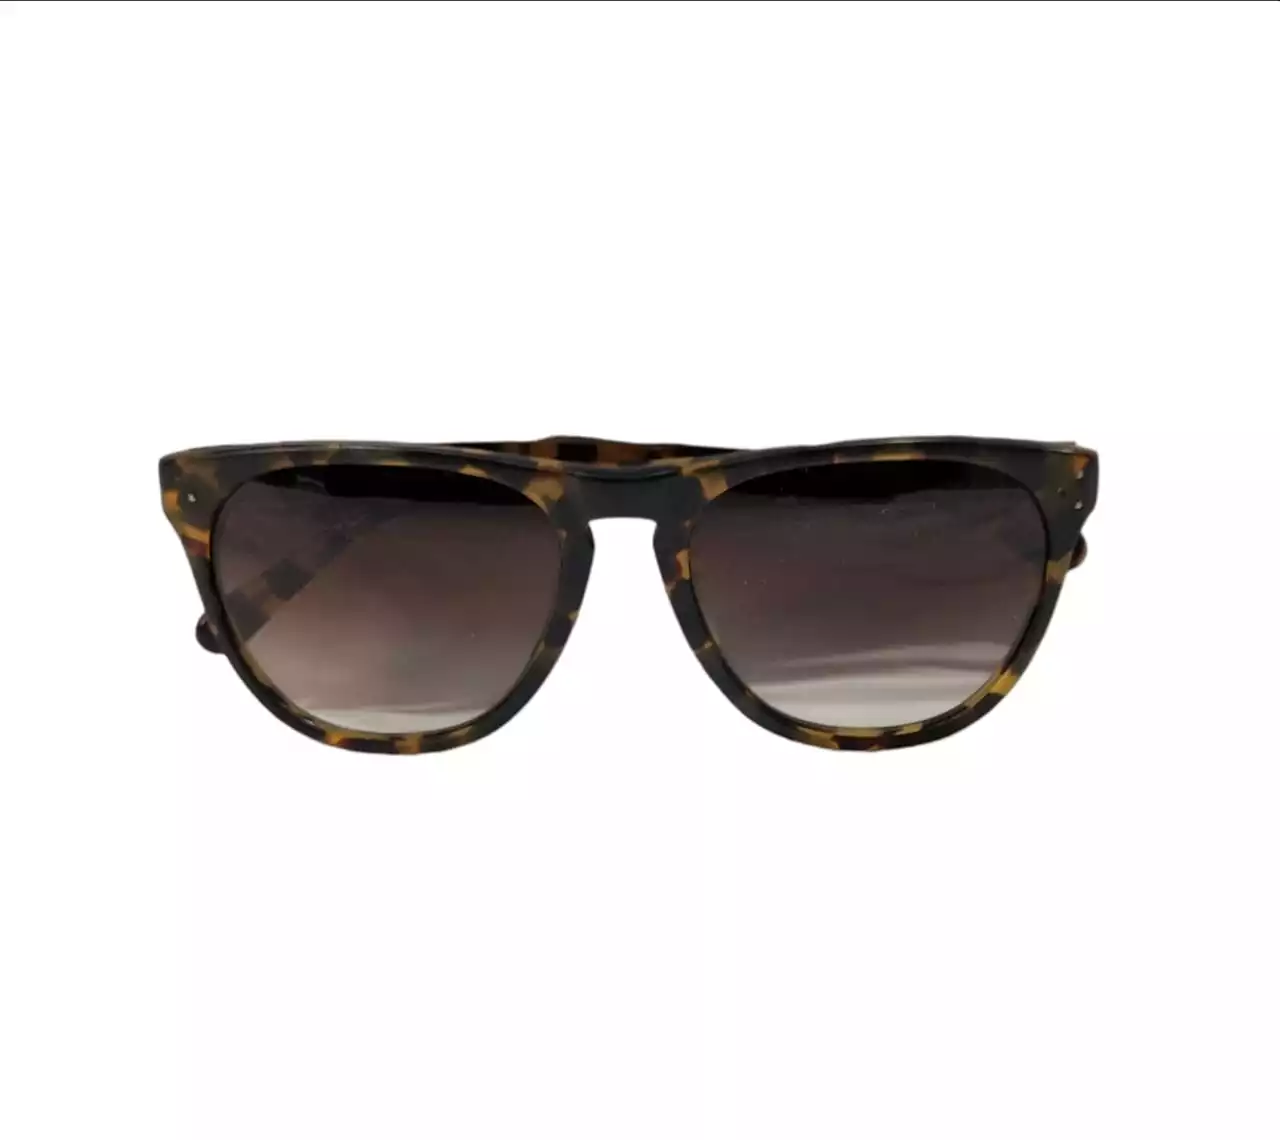 Sunglasses by Oliver Peoples